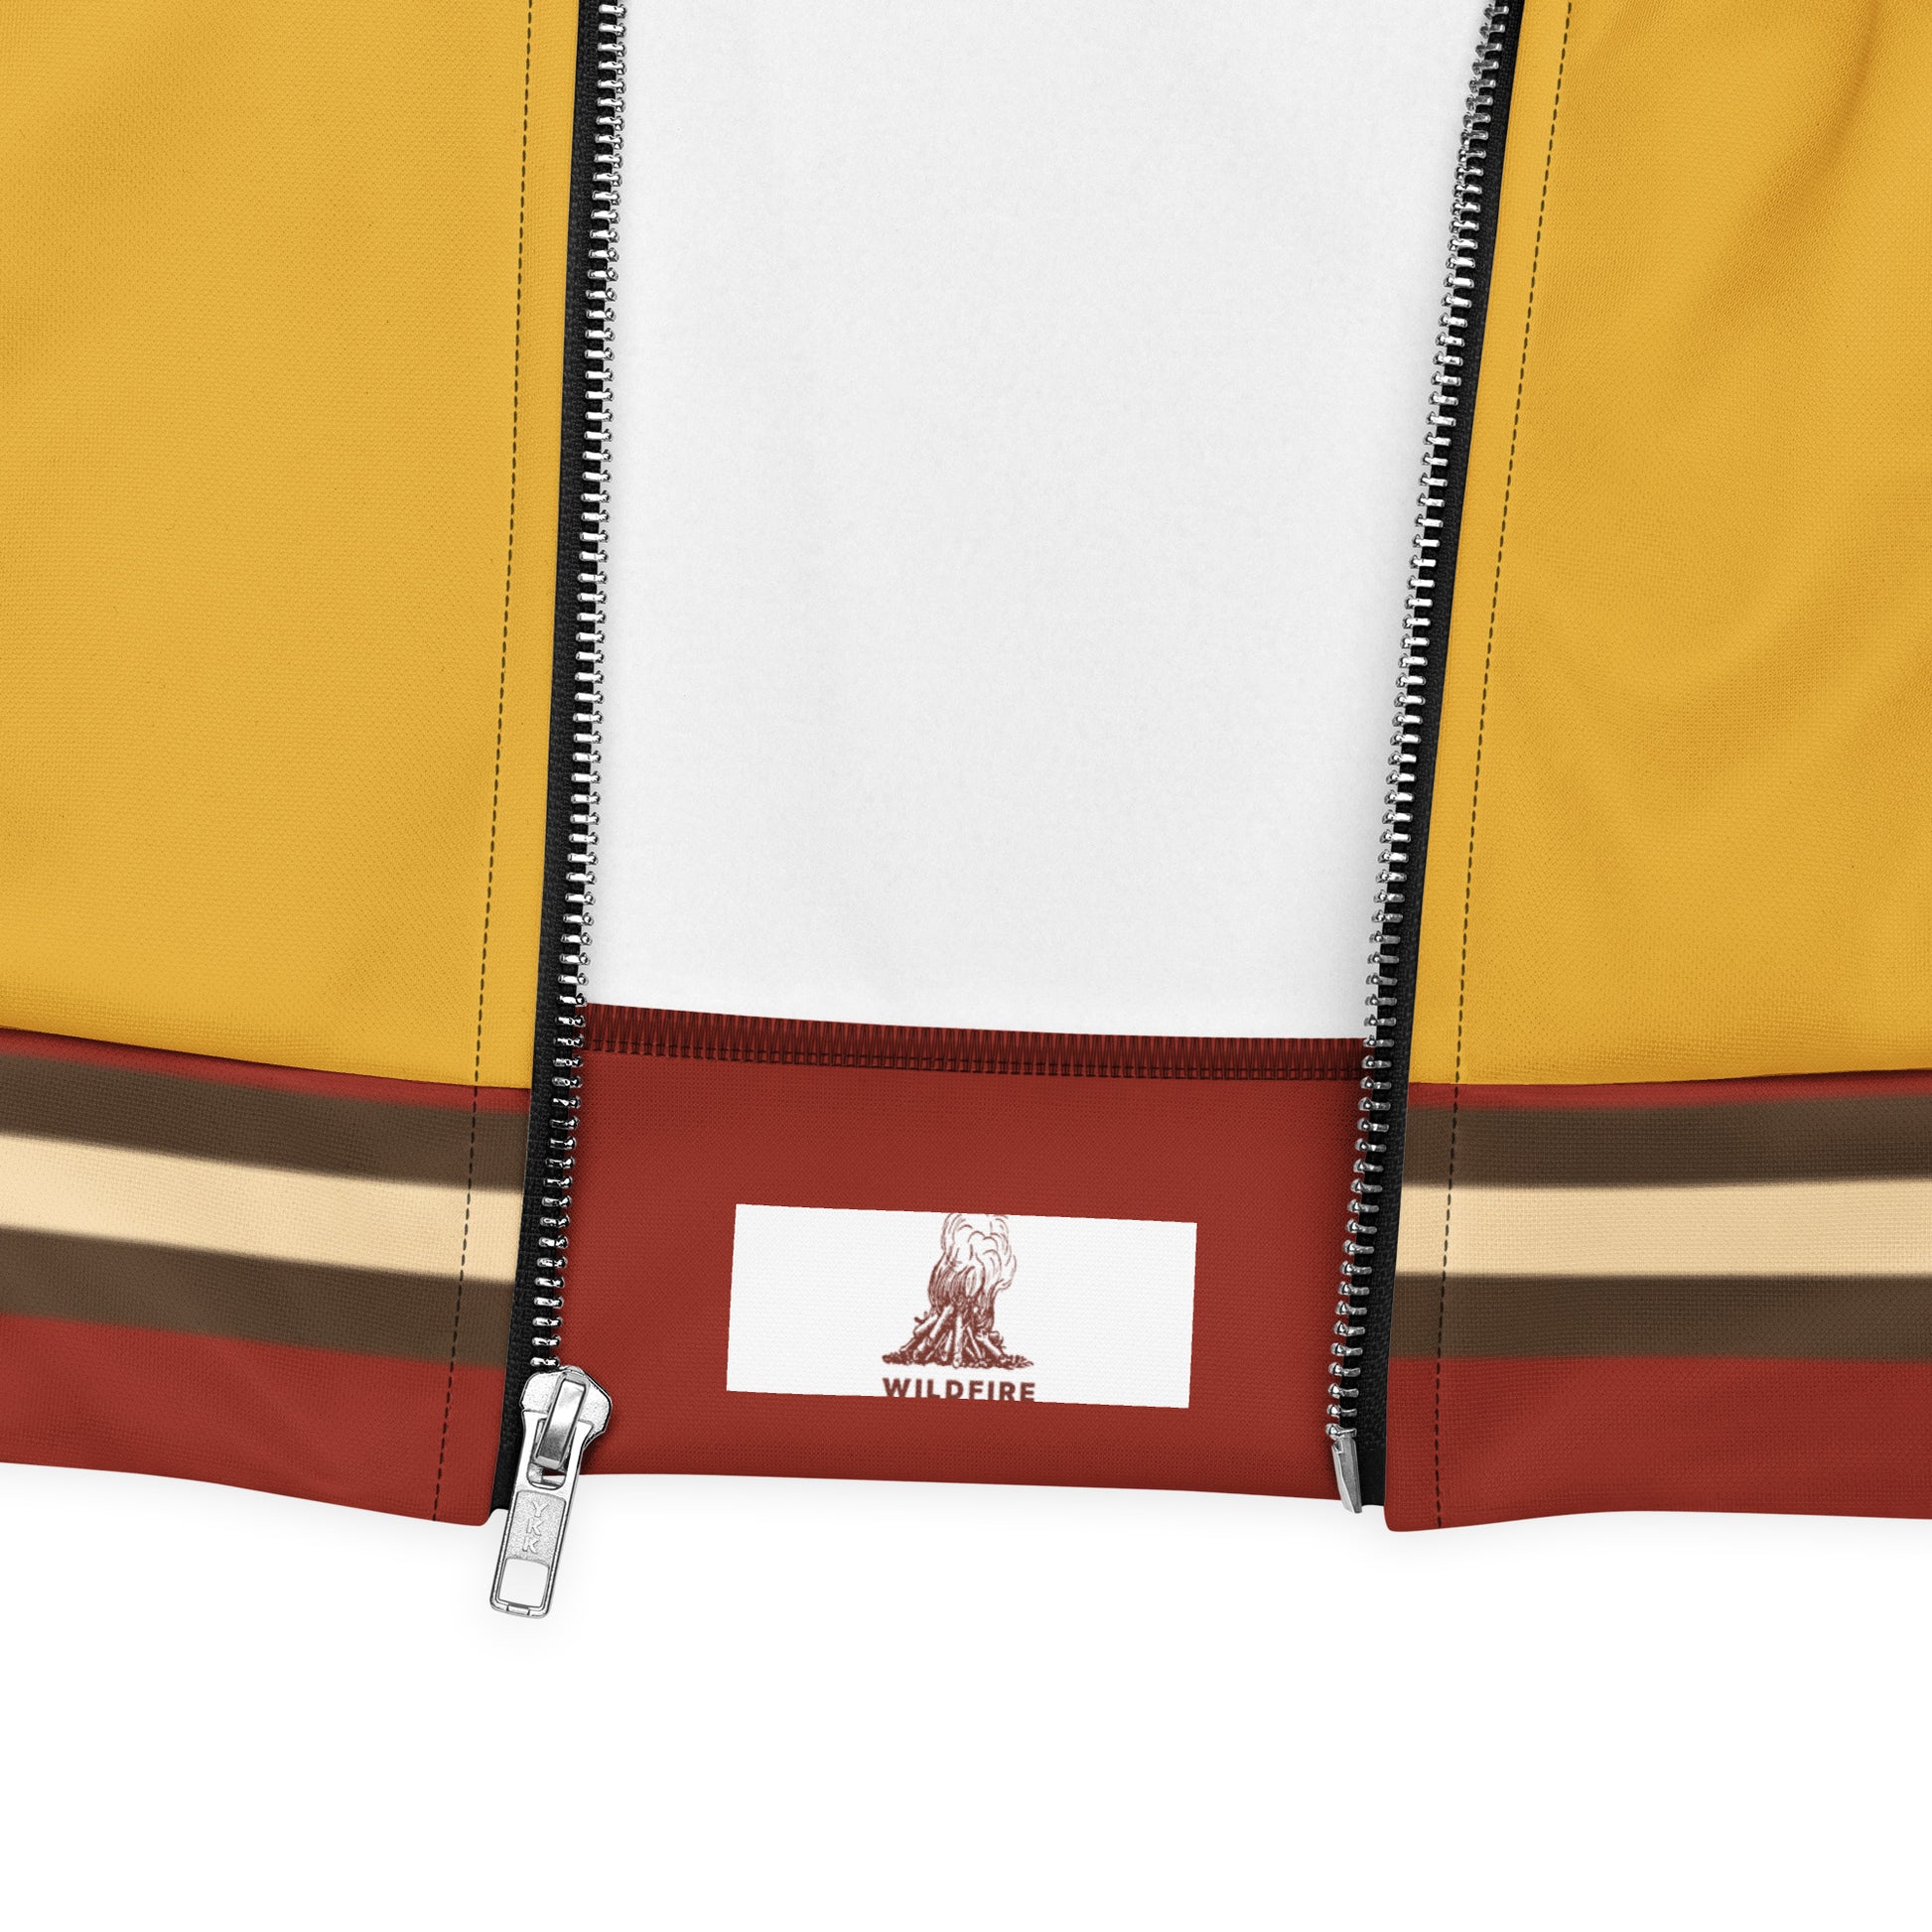 Wildfire Cigars all over printed light jacket in gold red brown and cream zoomed in on inside label